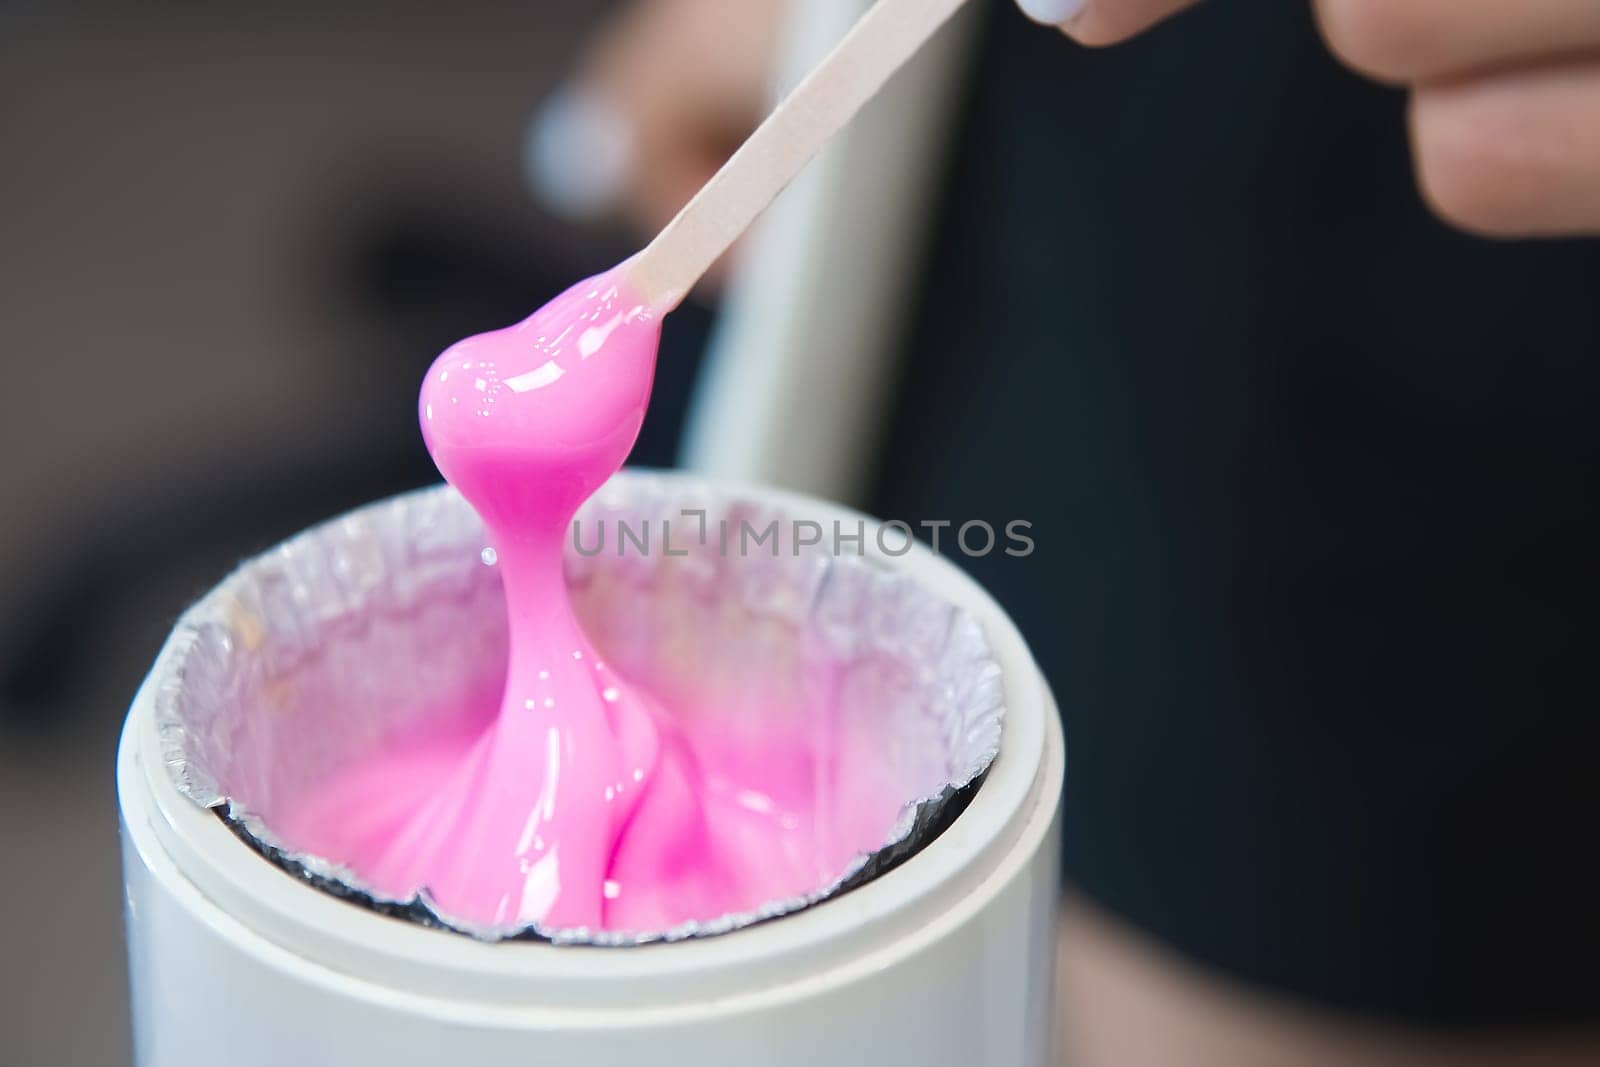 depilation and beauty, sugar paste or wax for hair removal. Preparation of pink wax for sugaring. Close-up of sugar paste or wax honey for hair removal using a wooden wax spatula.